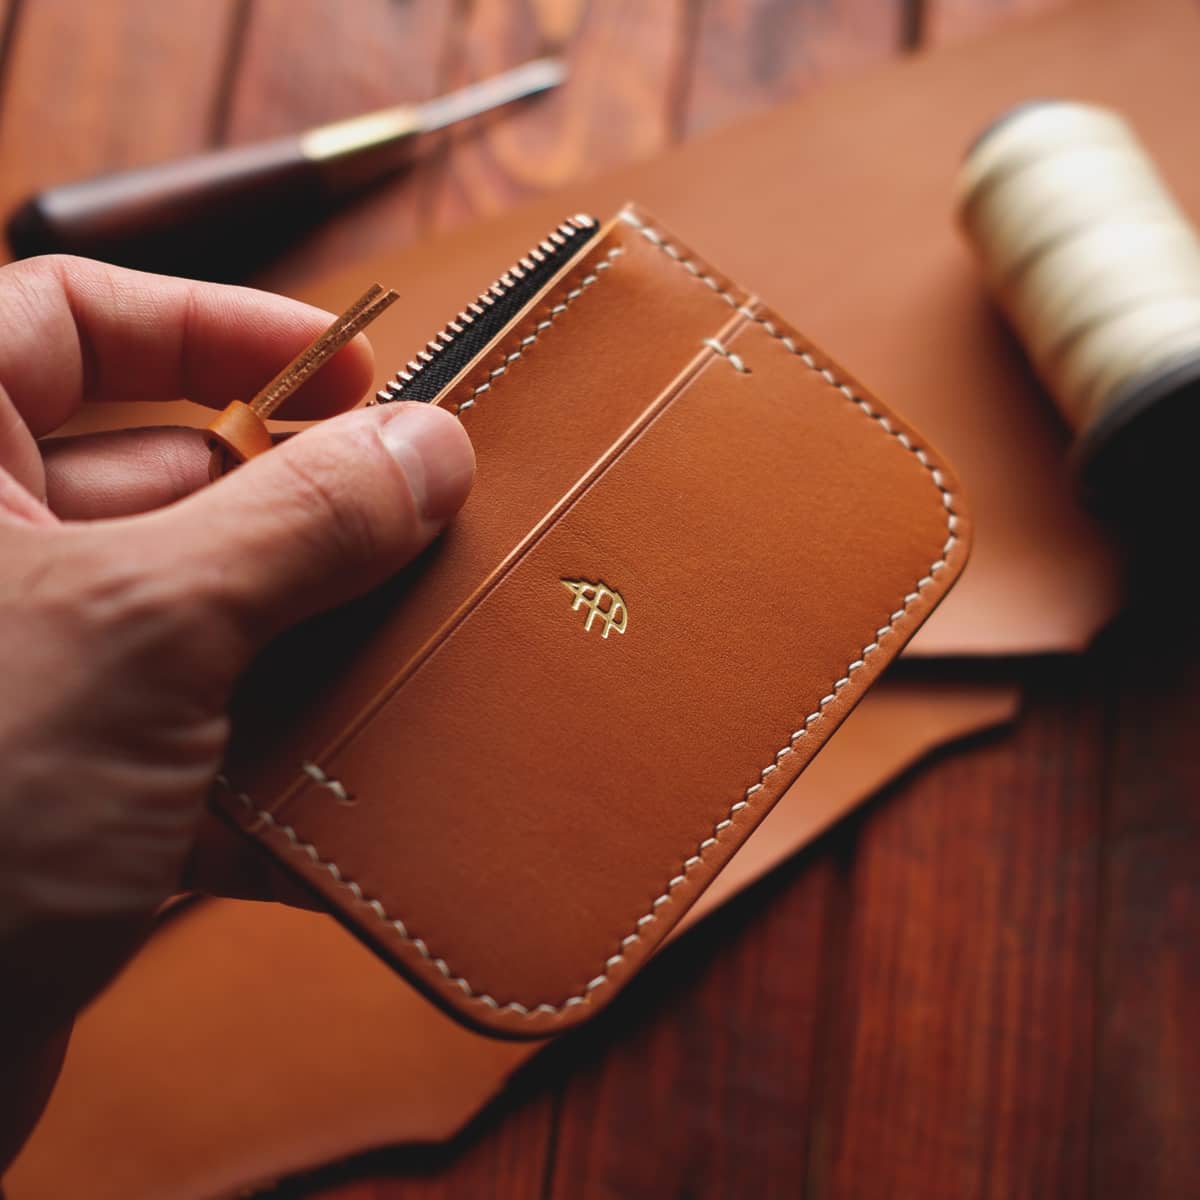 The Coulter Zipper Wallet in premium light brown aniline veg tan leather held in hand